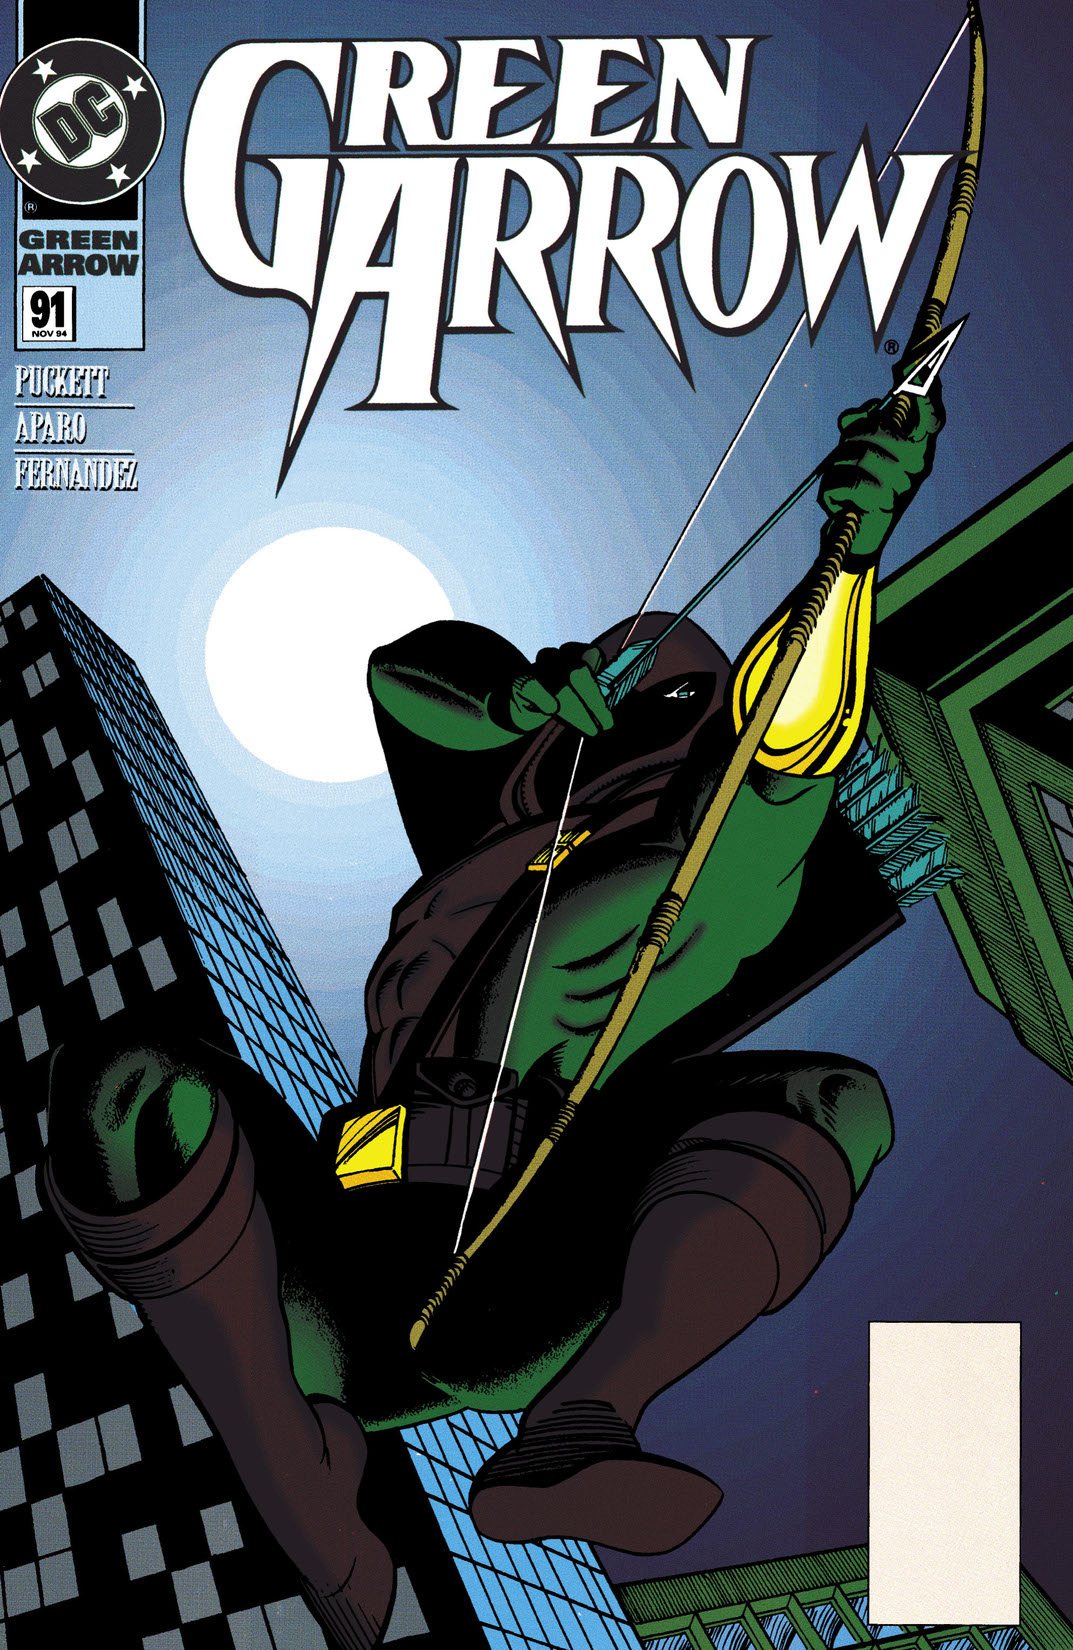 Green Arrow (1987-1998) #91 preview images